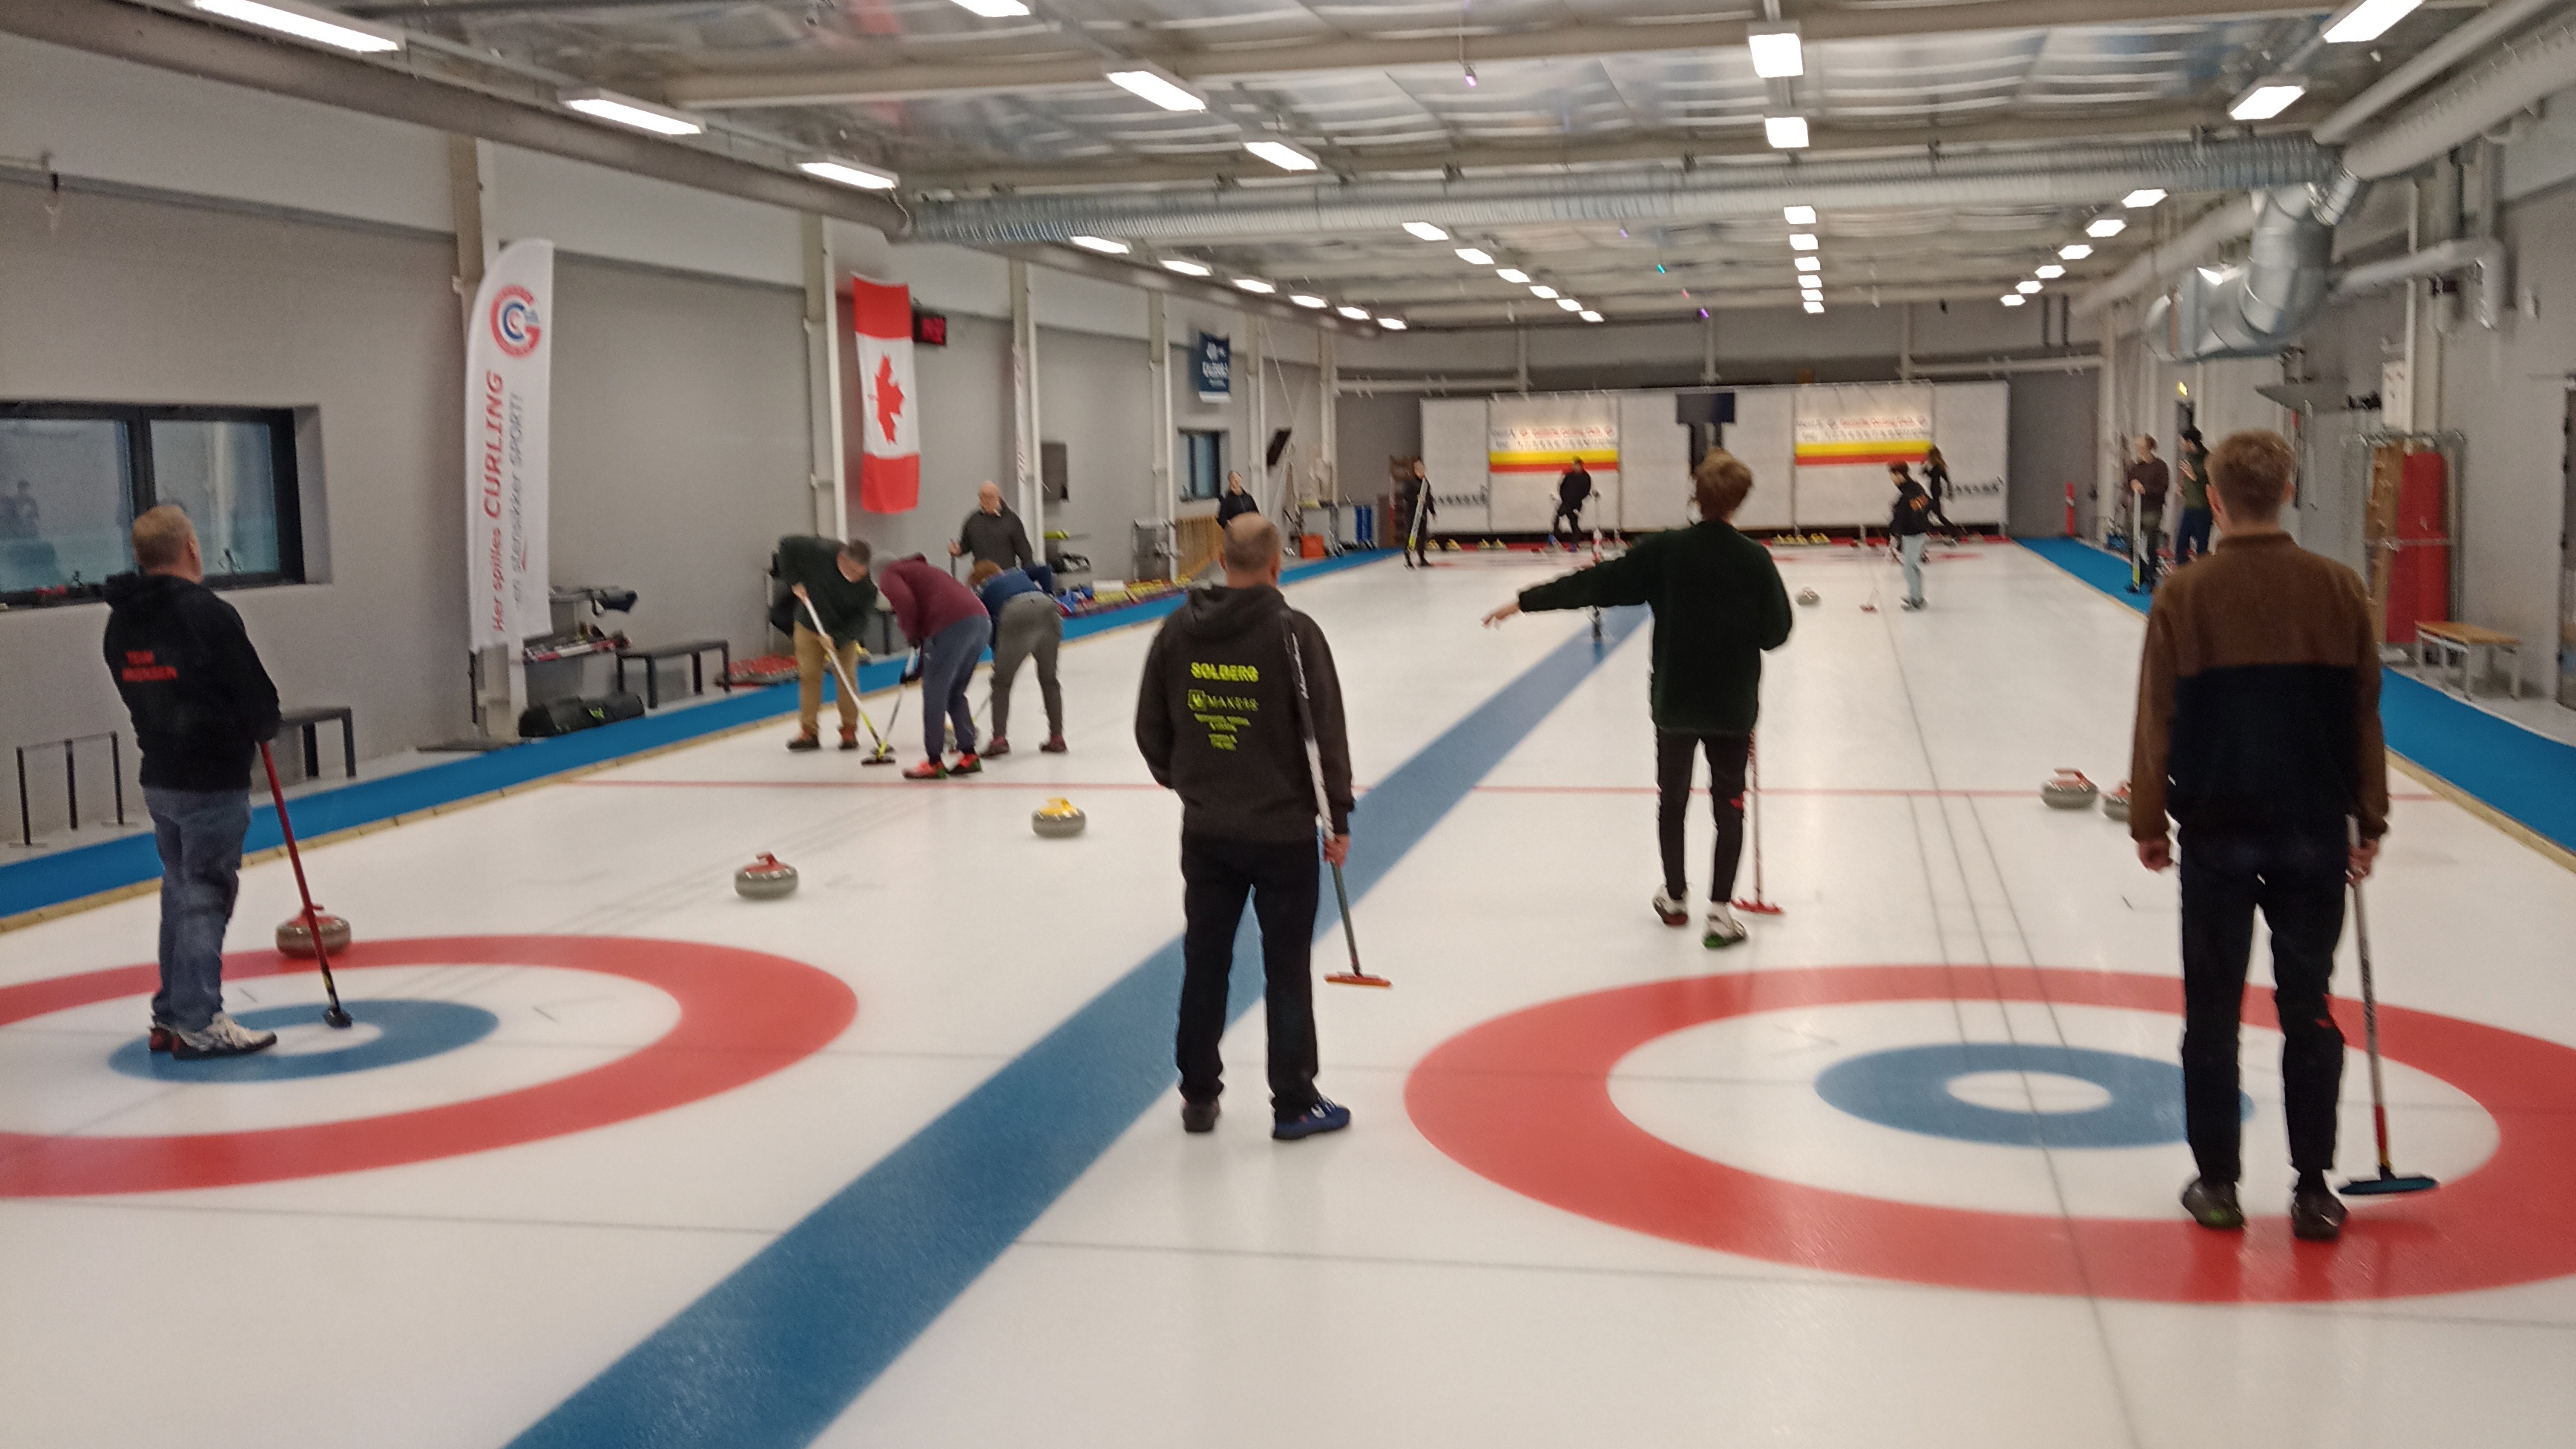 8 hold deltager i Curl-&-Fun-turnering